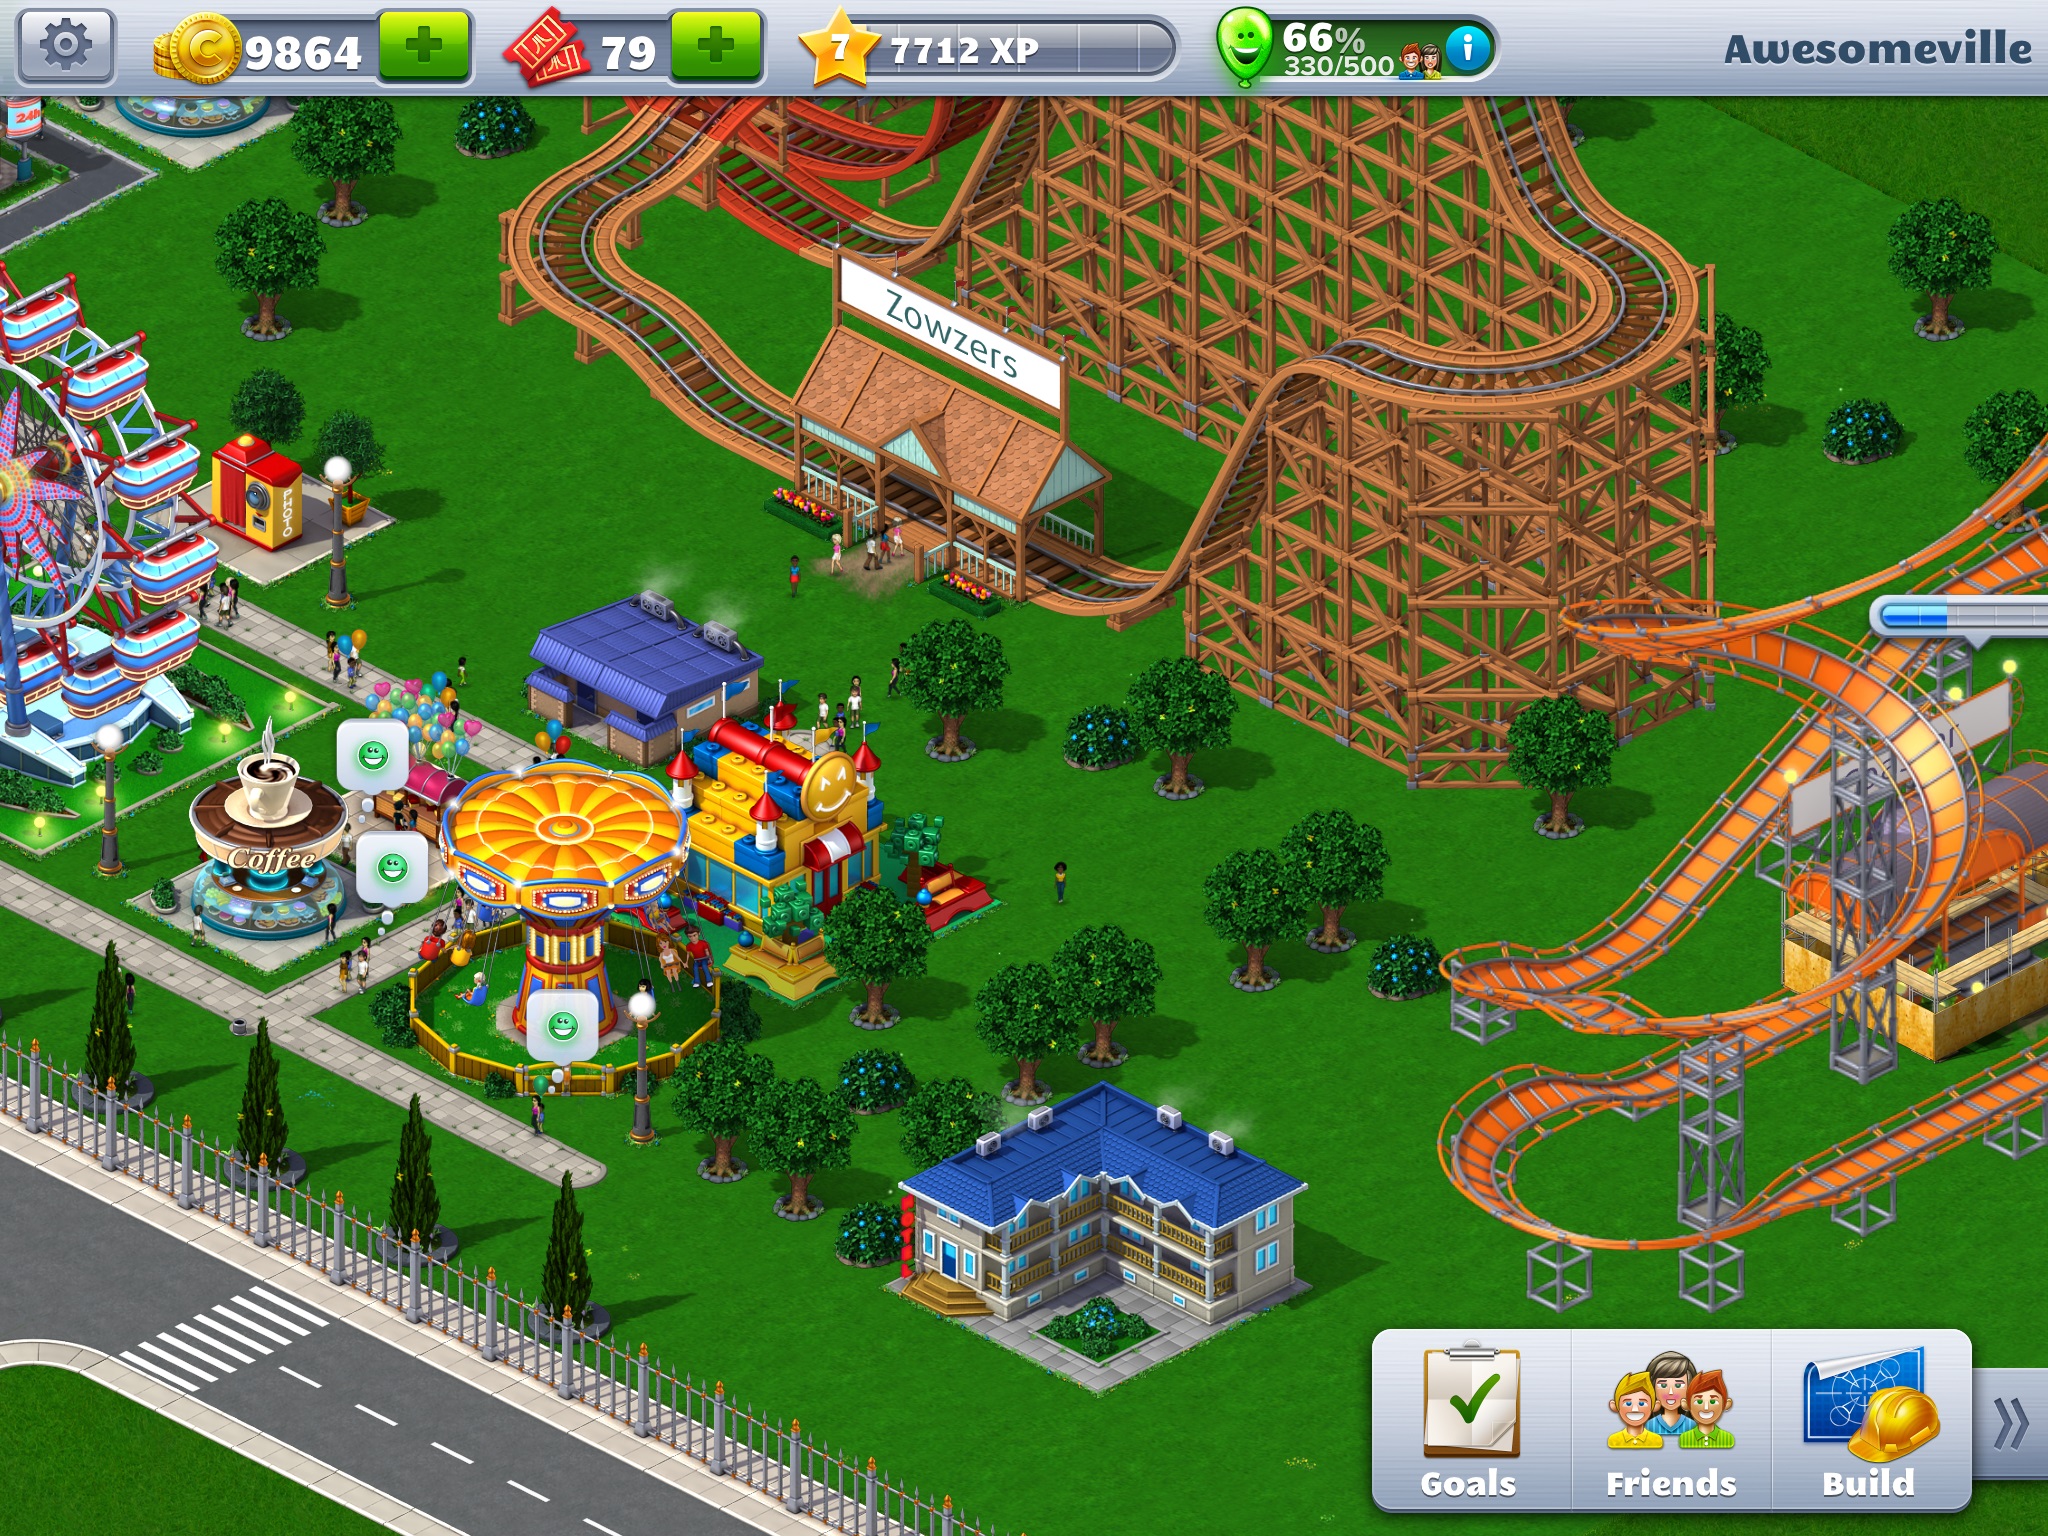 roller coaster tycoon 2 torrent pirate bay